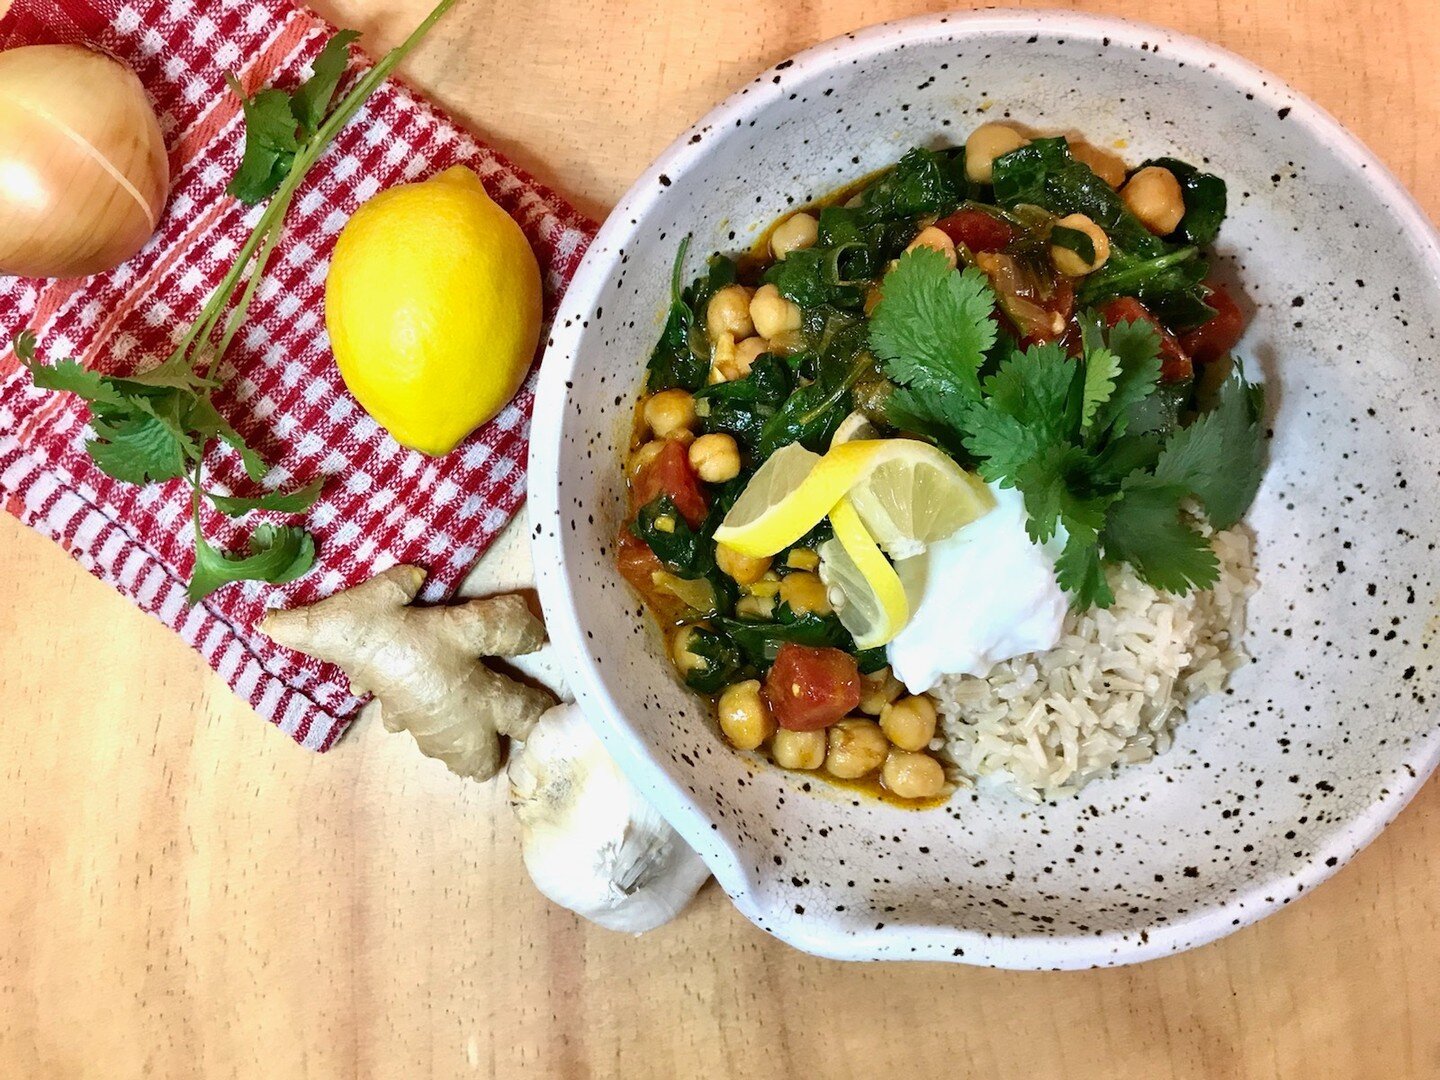 Join us for LIVE monthly Cook Alongs with @elizathechef to whip up delicious dishes like this yummy vegetarian Chana Masala with Spinach. Sign up with the link in our profile!

#cookalong #food #health #foodie #Lifestyle #cook #healthycooking #heathy